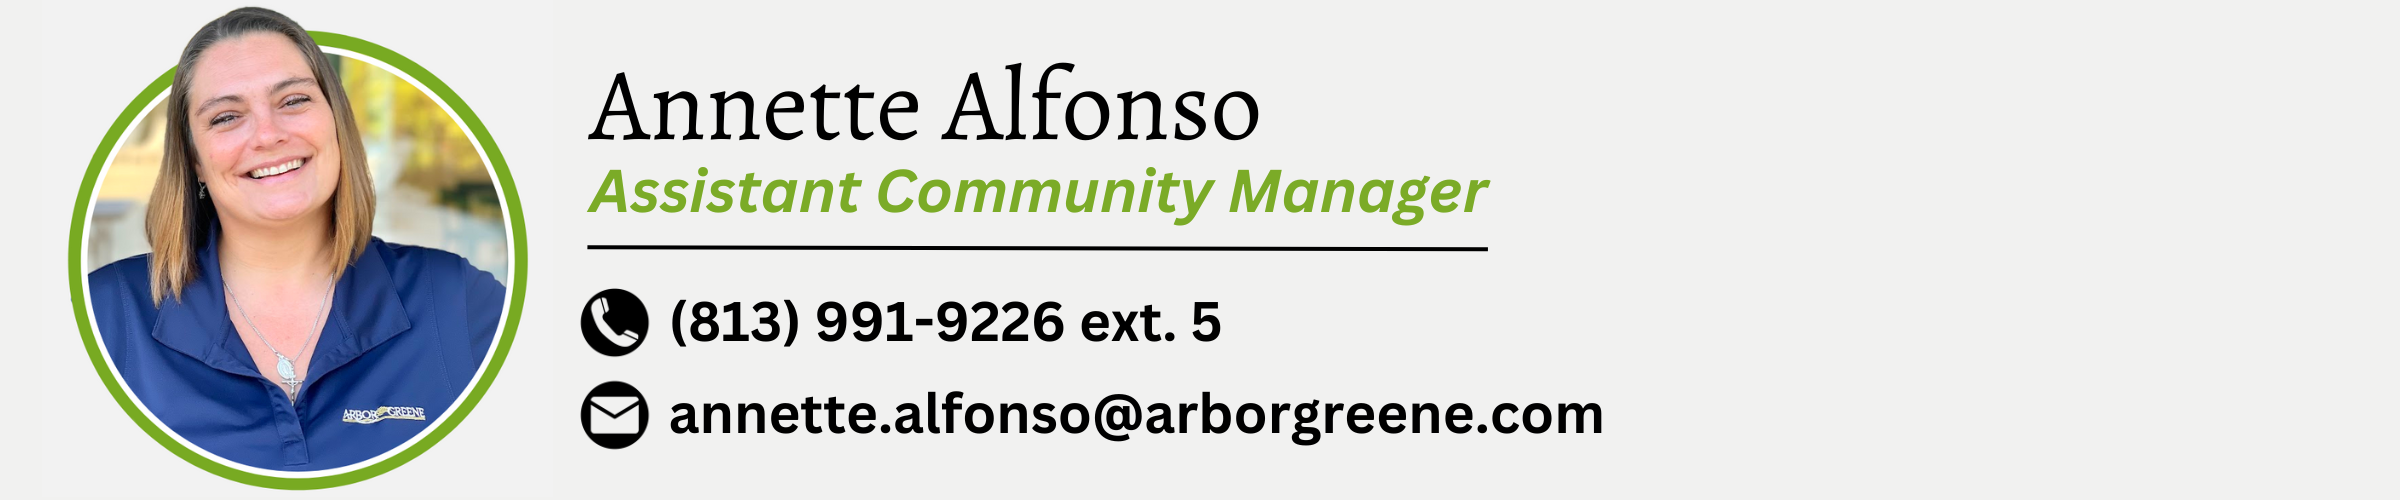 Annette Alfonso. Assistant Community Manager. Phone number is 813-991-9226 extension 5. Email is annette.alfonso@arborgreene.com.